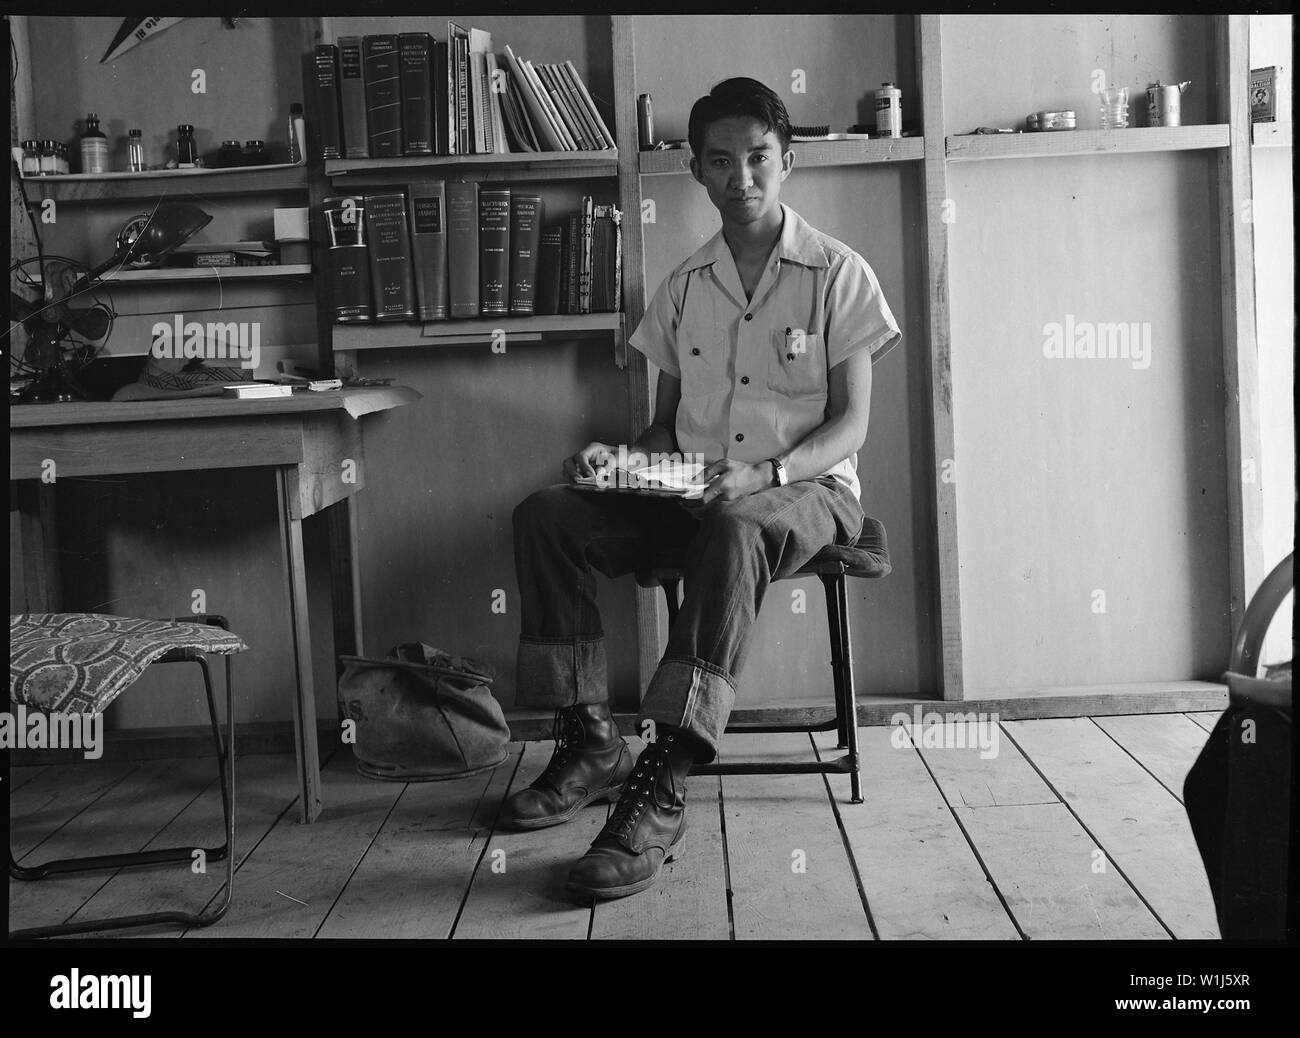 Sacramento, California. Harvey Akio Itano, 21, 1942 graduate from the University of California wher . . .; Scope and content:  The full caption for this photograph reads: Sacramento, California. Harvey Akio Itano, 21, 1942 graduate from the University of California where he received his Bachelor of Science [in] Chemistry degree. He was chosen by the faculty as University Medalist for 1942 and was a member of Phi Beta Kappa and Sigma Xi. Mr. Itano went to the Assembly center prior to the commencement exercises at which President Robert Gordon Sproul said, He cannot be here with us today. His co Stock Photo